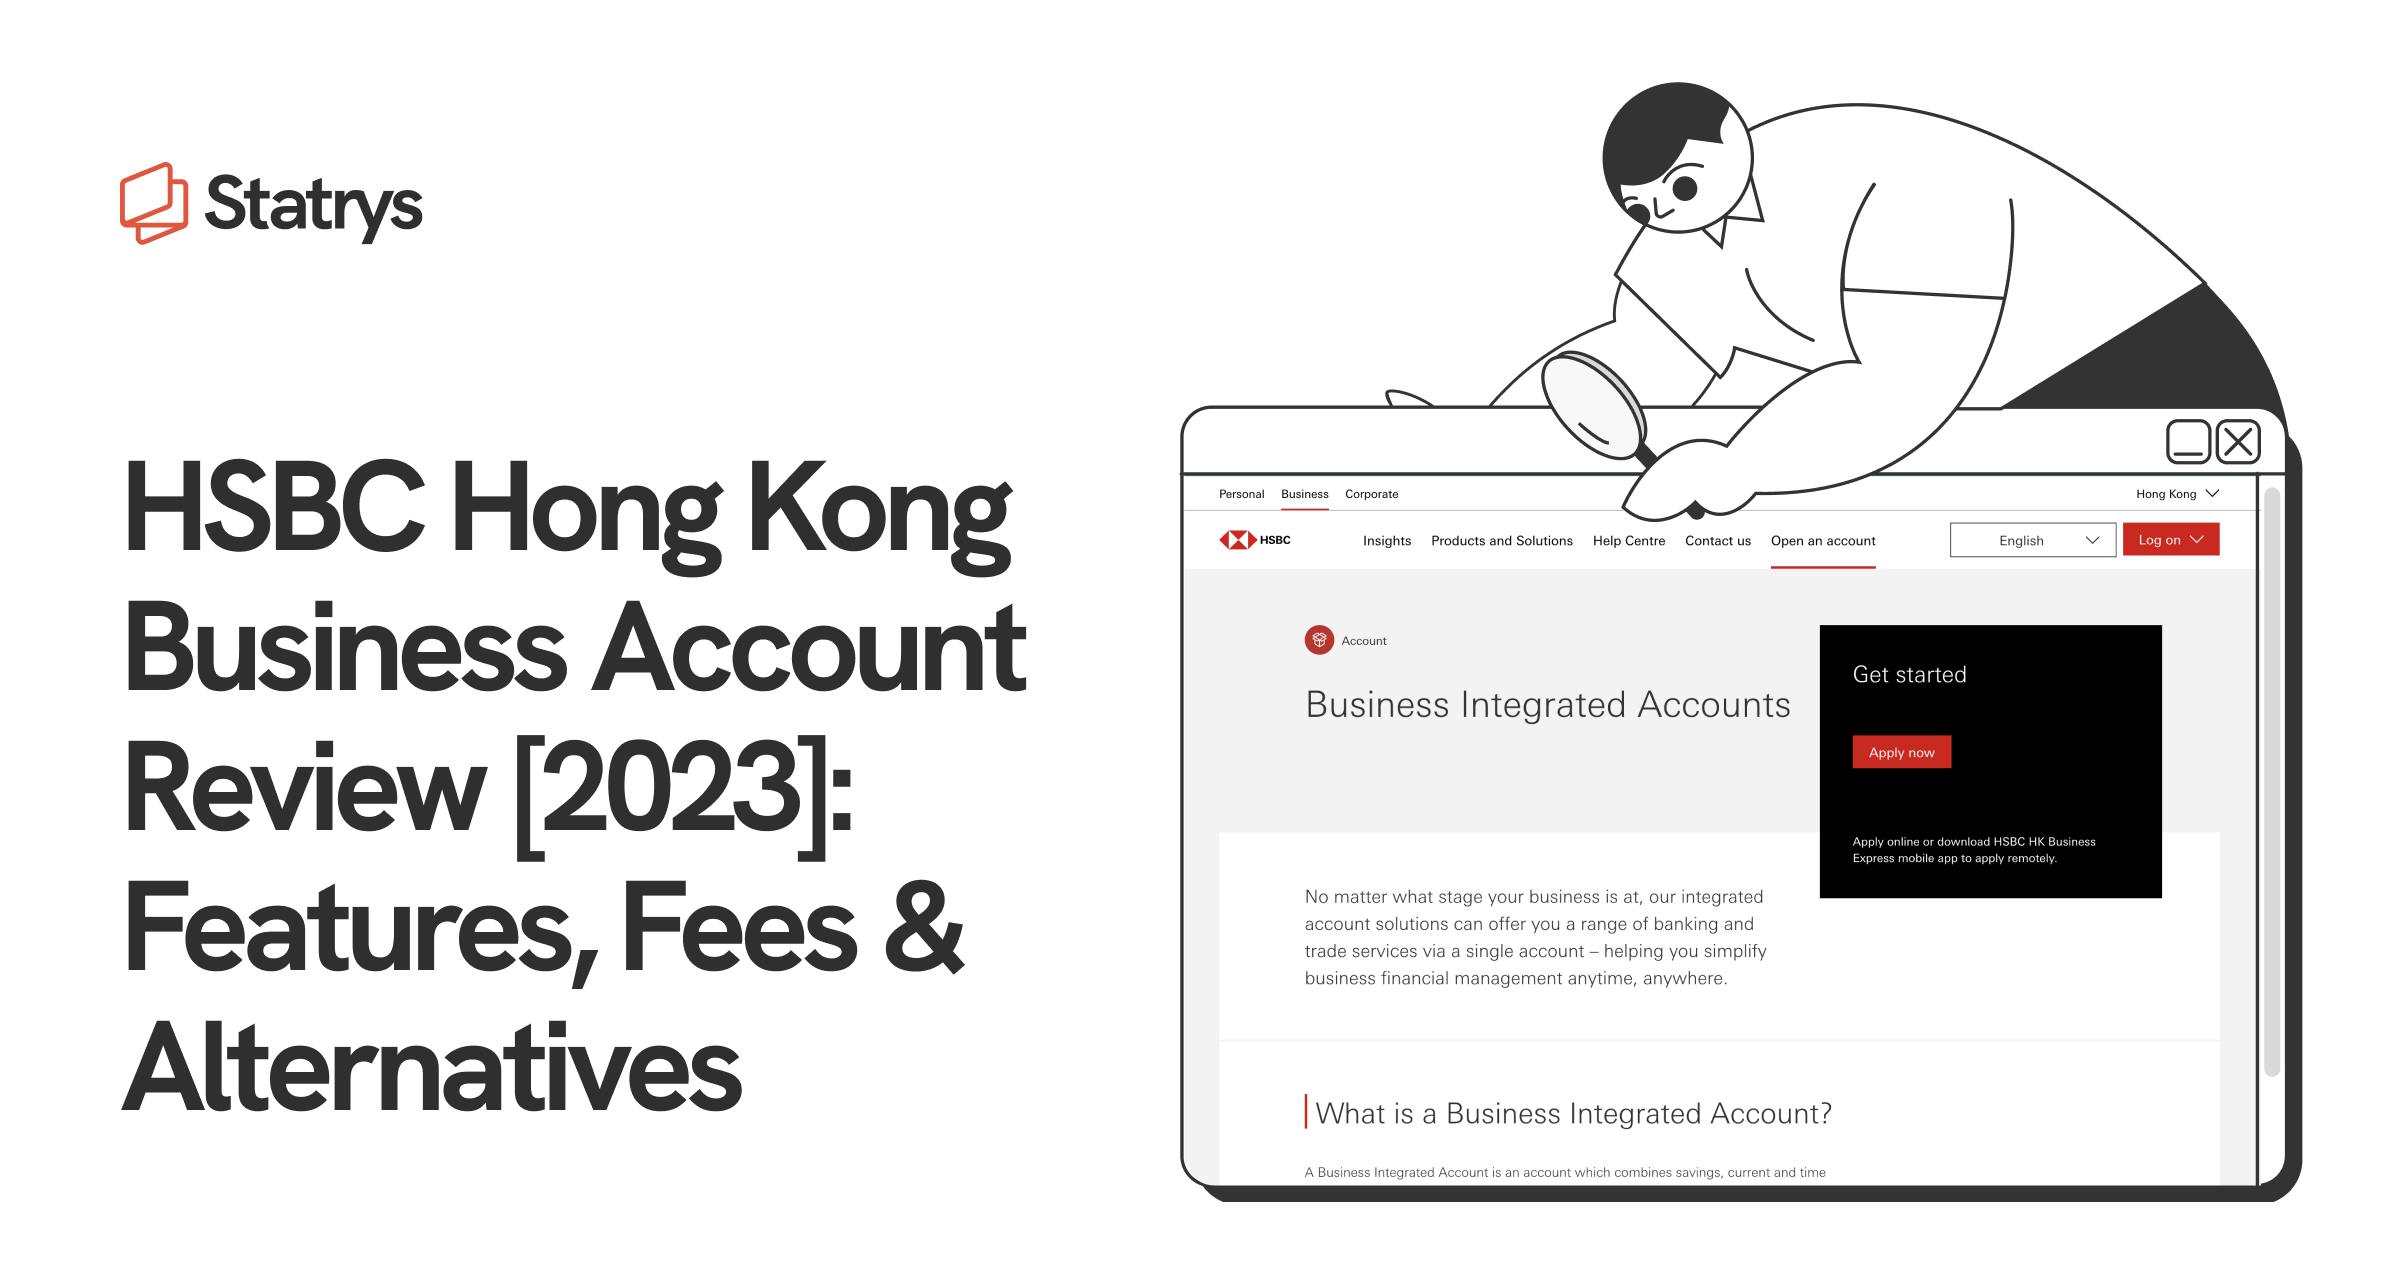 HSBC Hong Kong Business Account Review [2023] Features, Fees